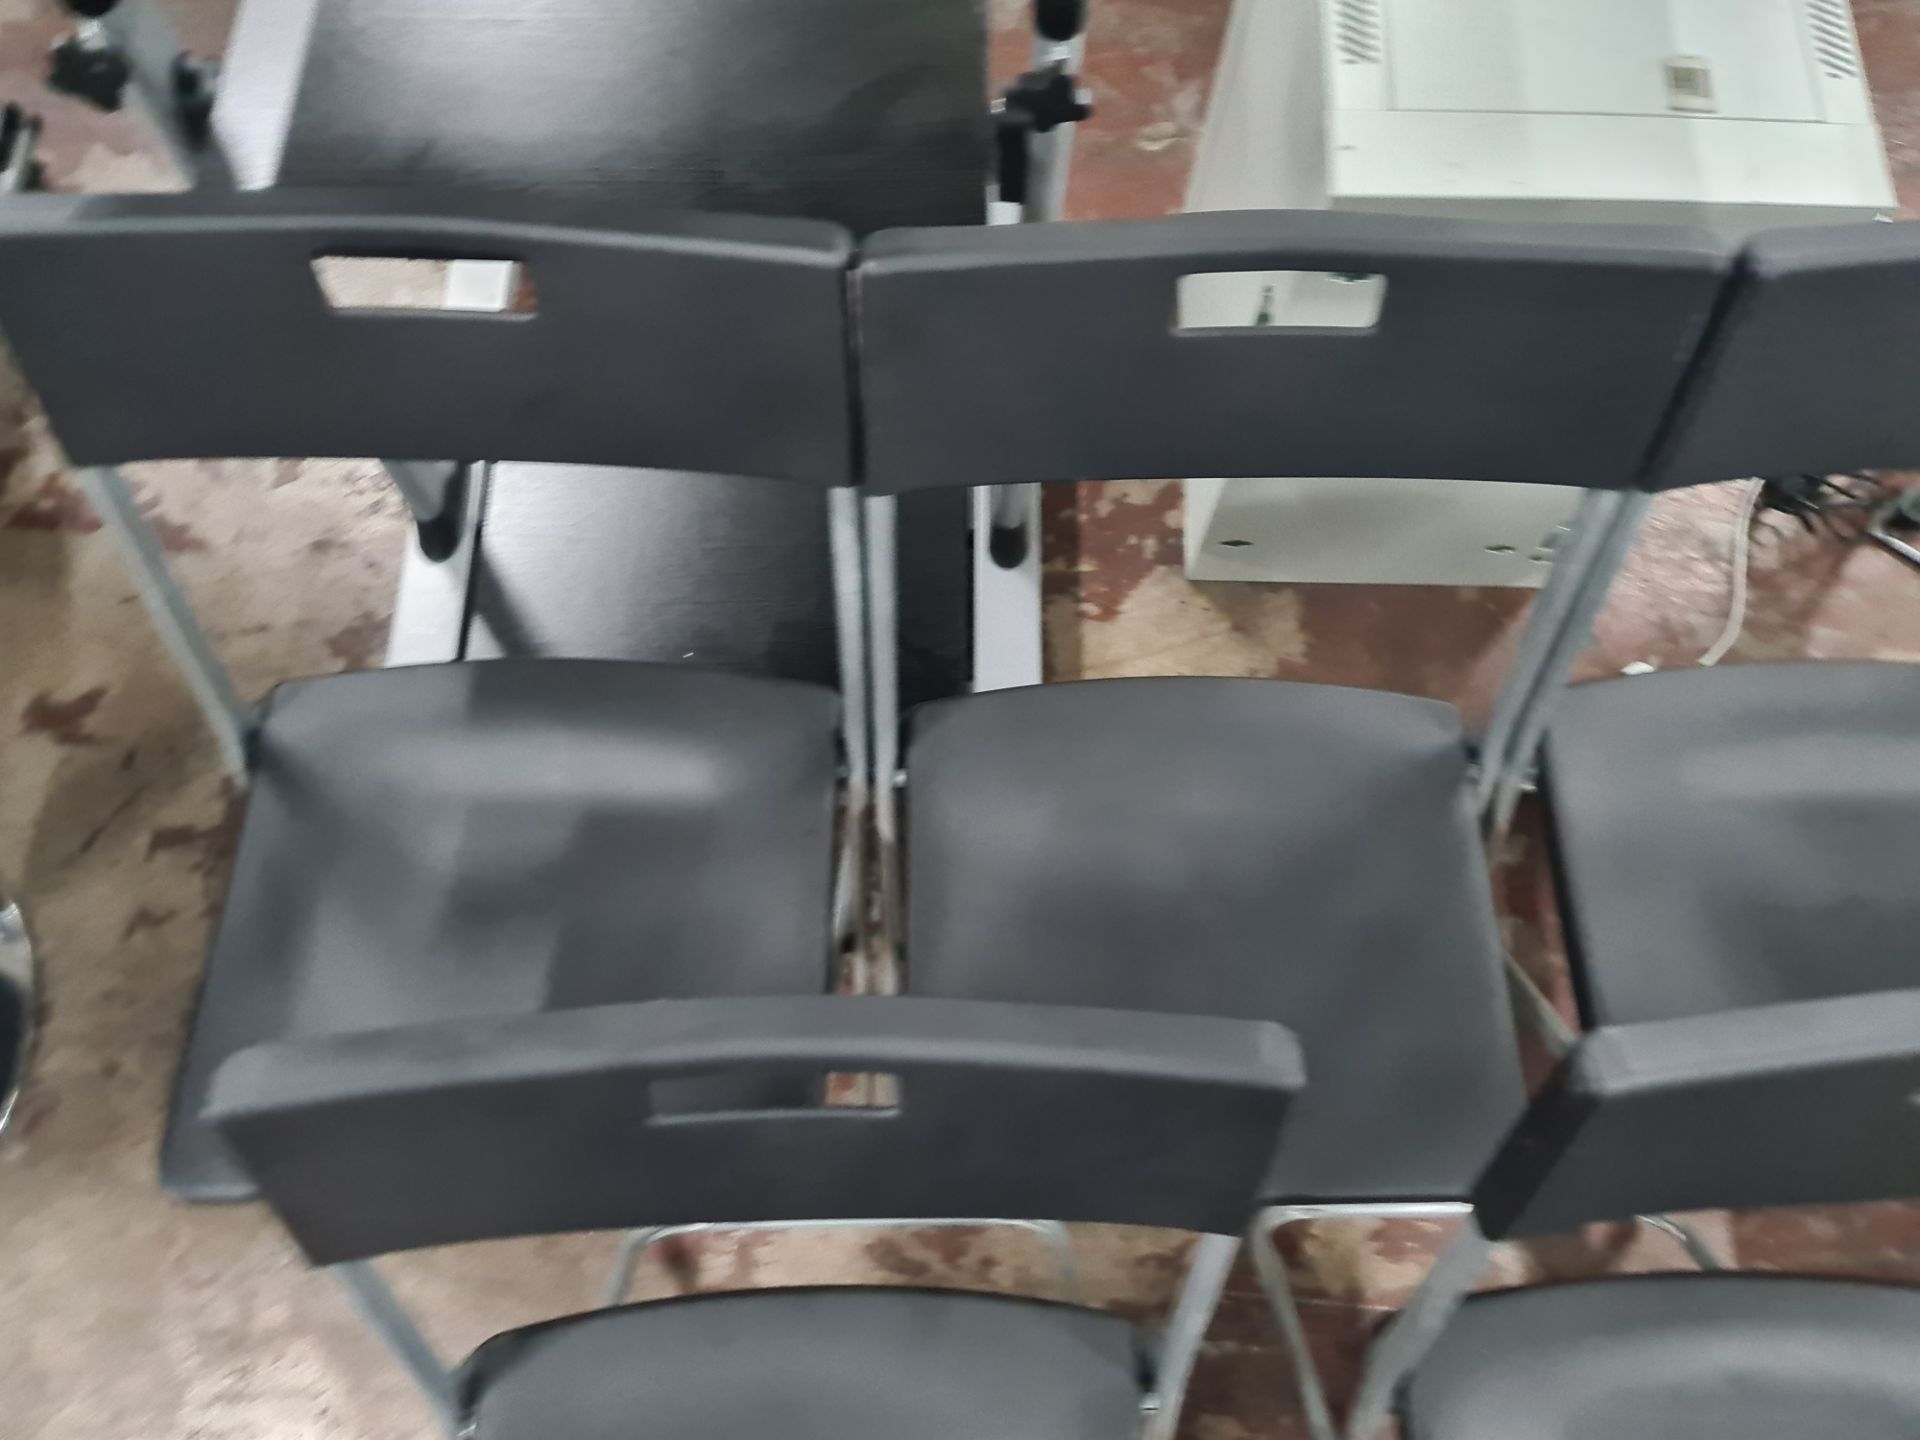 5 off matching black and grey folding chairs - Image 3 of 4